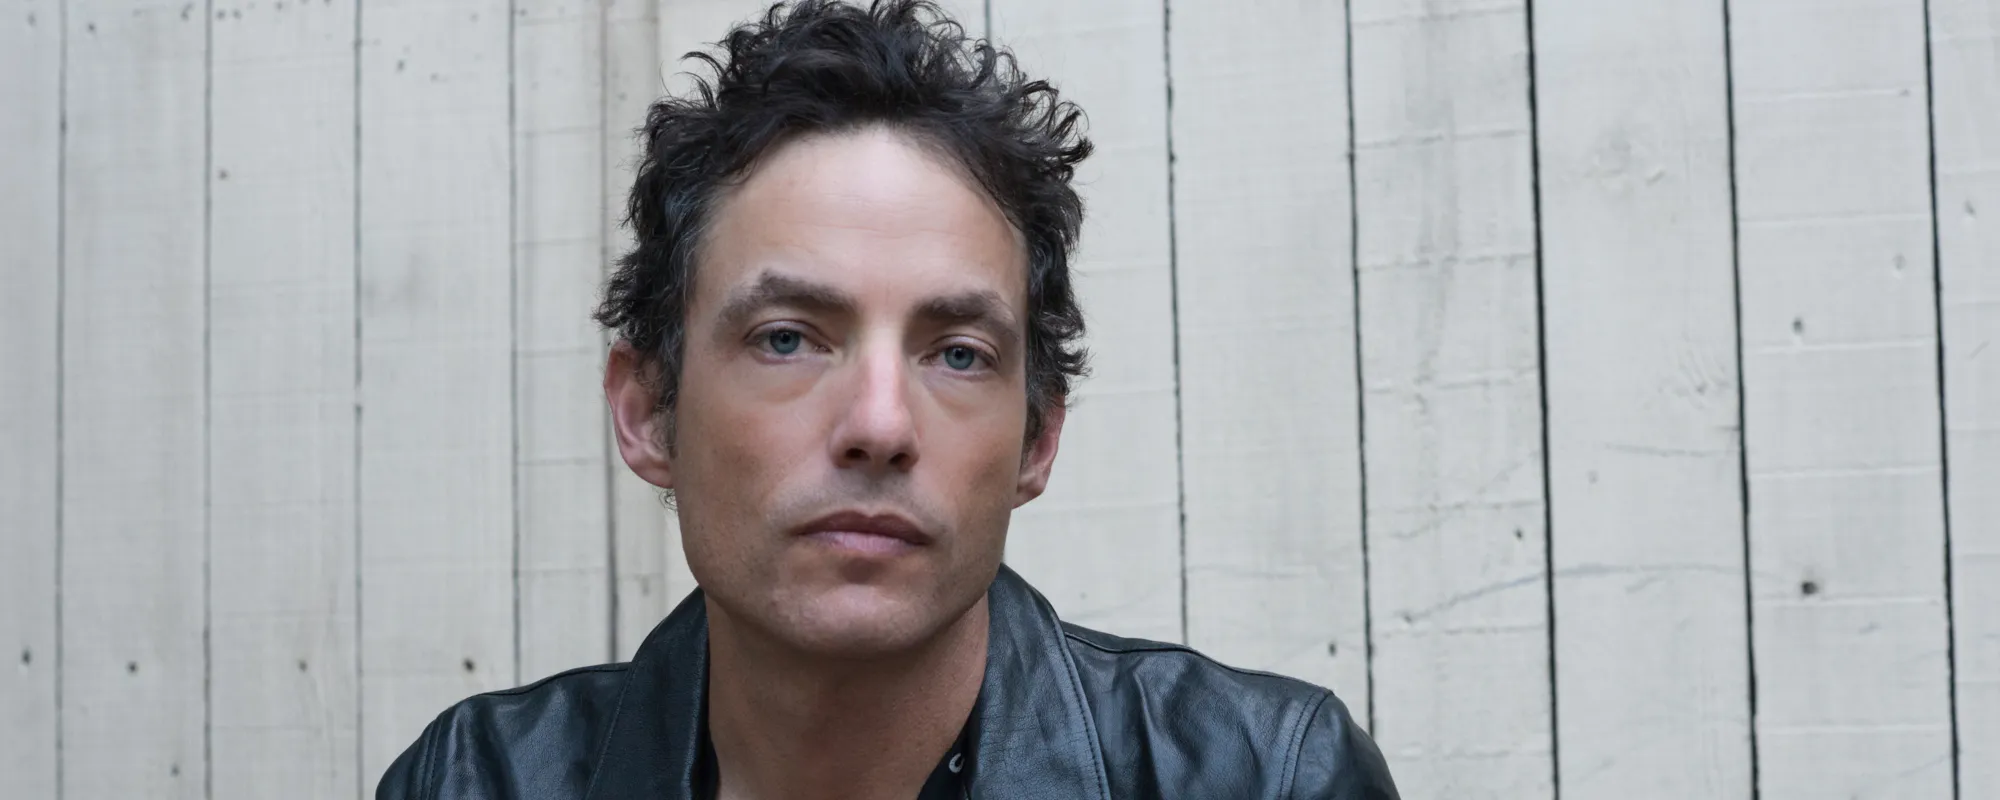 The Wallflowers: Closing the ‘Exit Wounds’